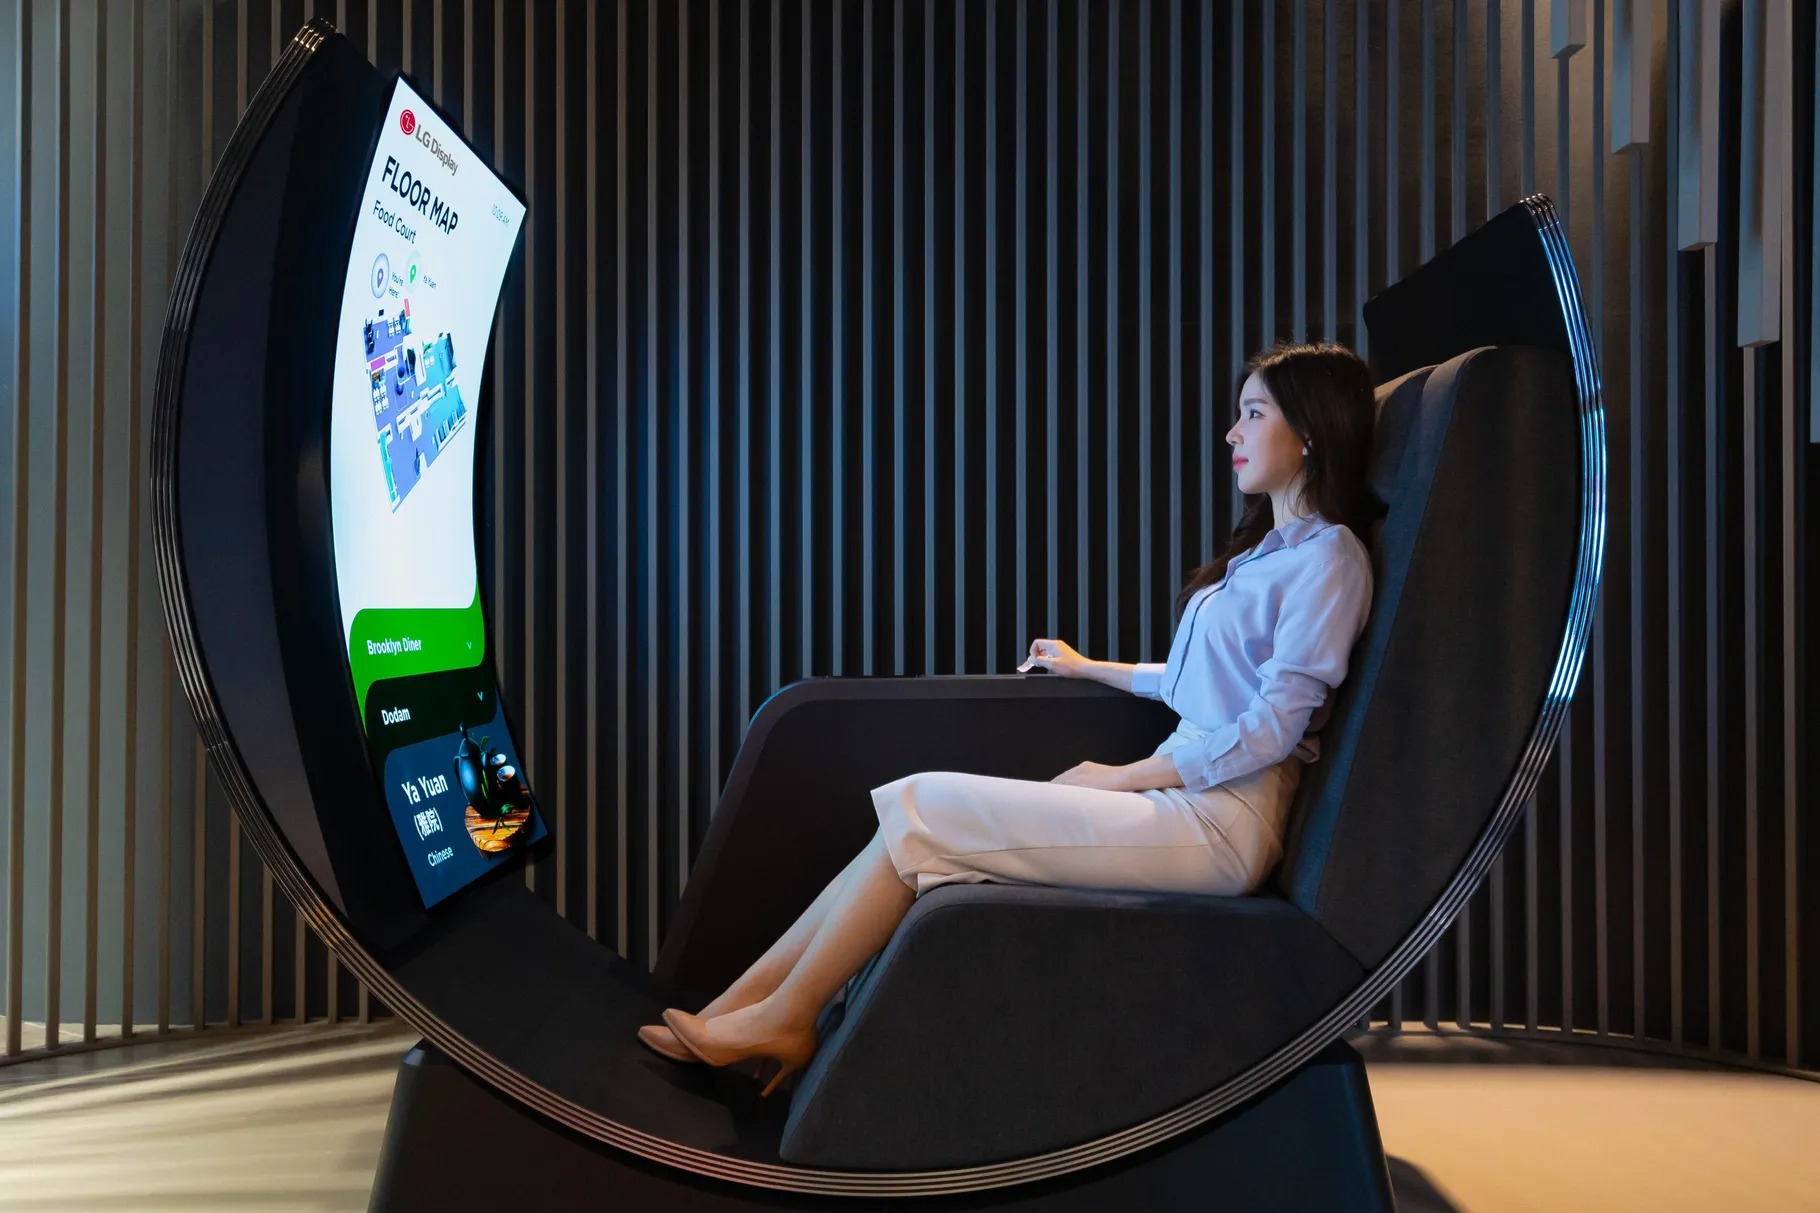 LG Display Media Chair at CES 20